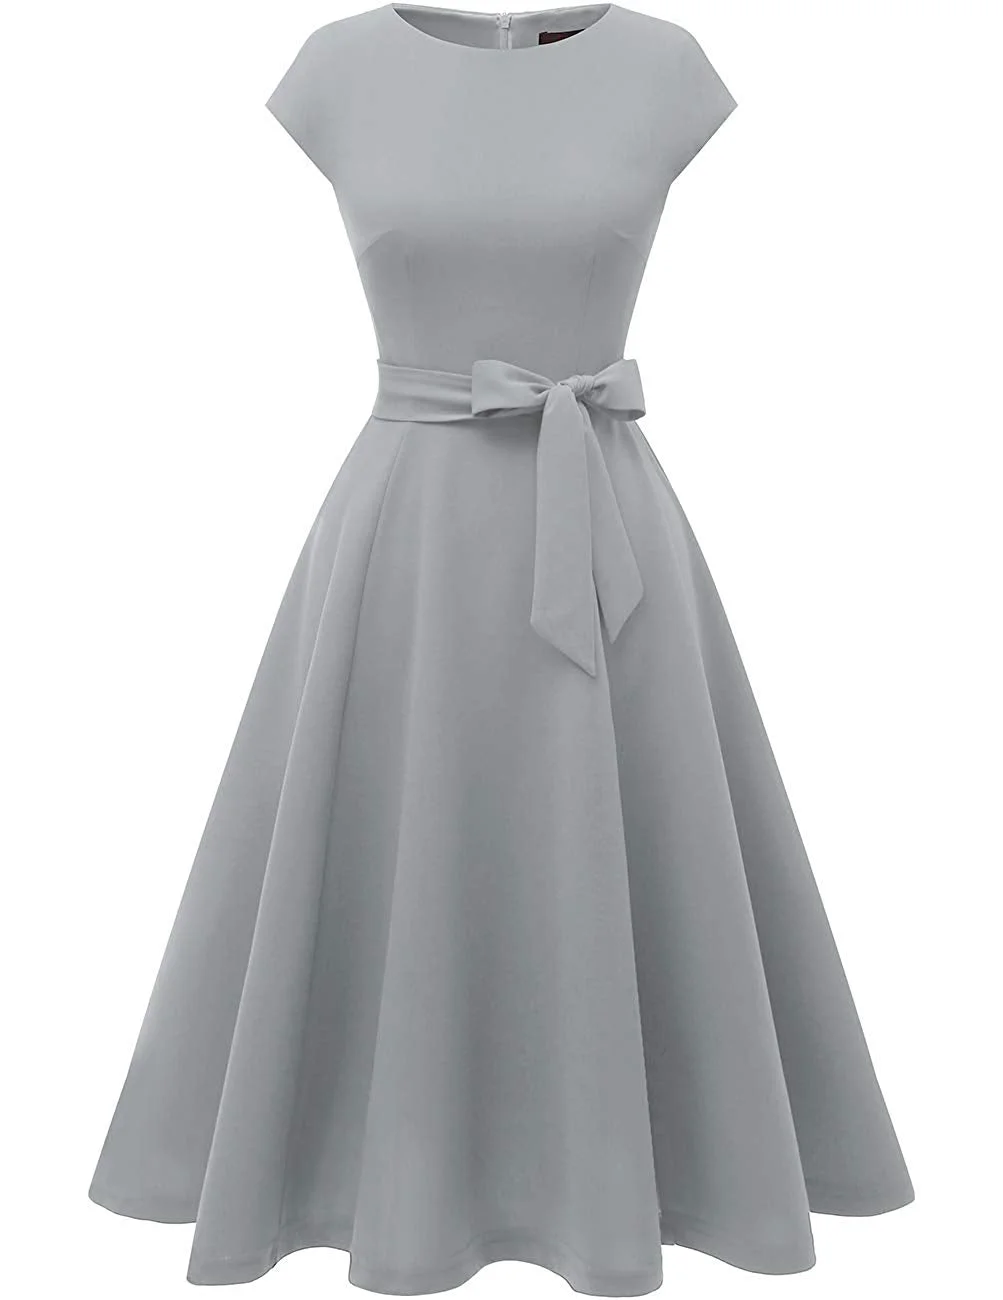 Women's Prom Tea Dress Vintage Swing Cocktail Party Dress with Cap-Sleeves